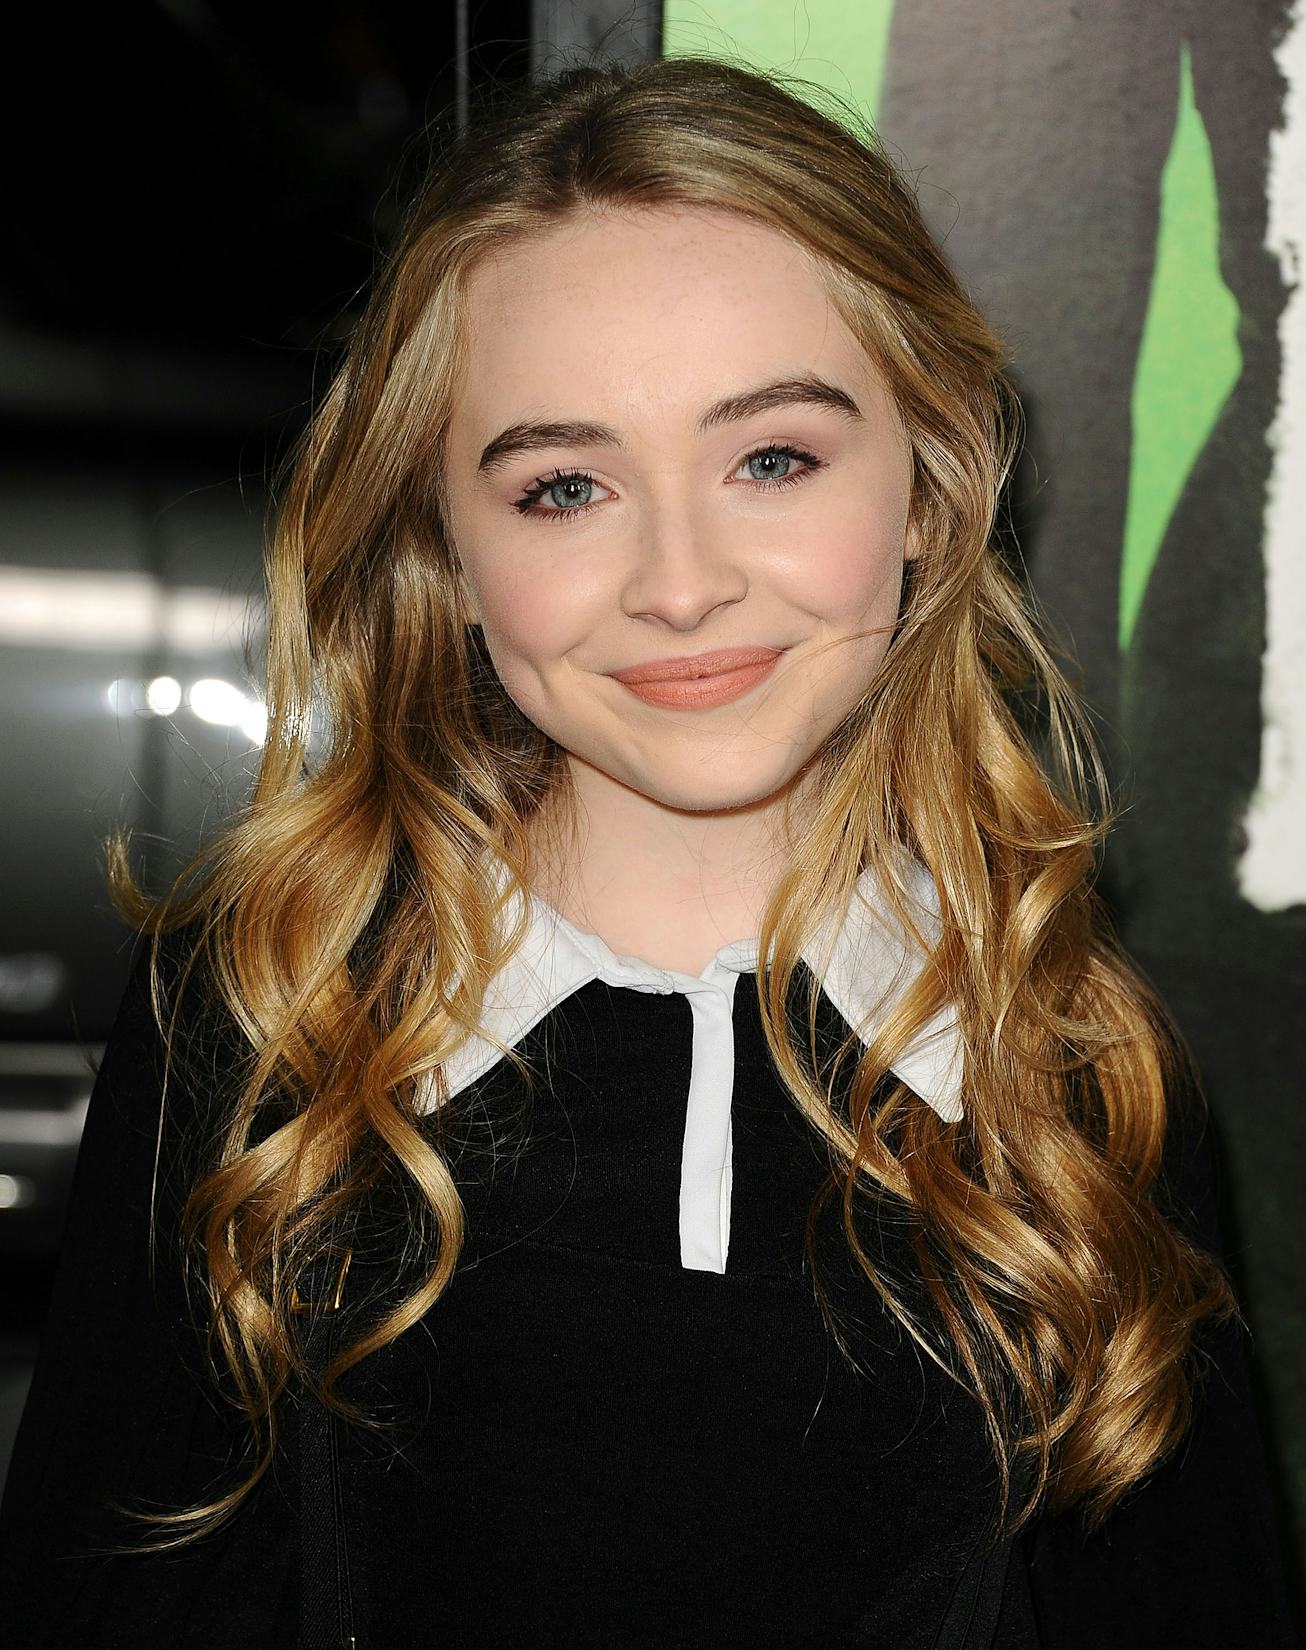 LOS ANGELES, CA - FEBRUARY 04:  Actress Sabrina Carpenter attends the premiere of "Vampire Academy" ...